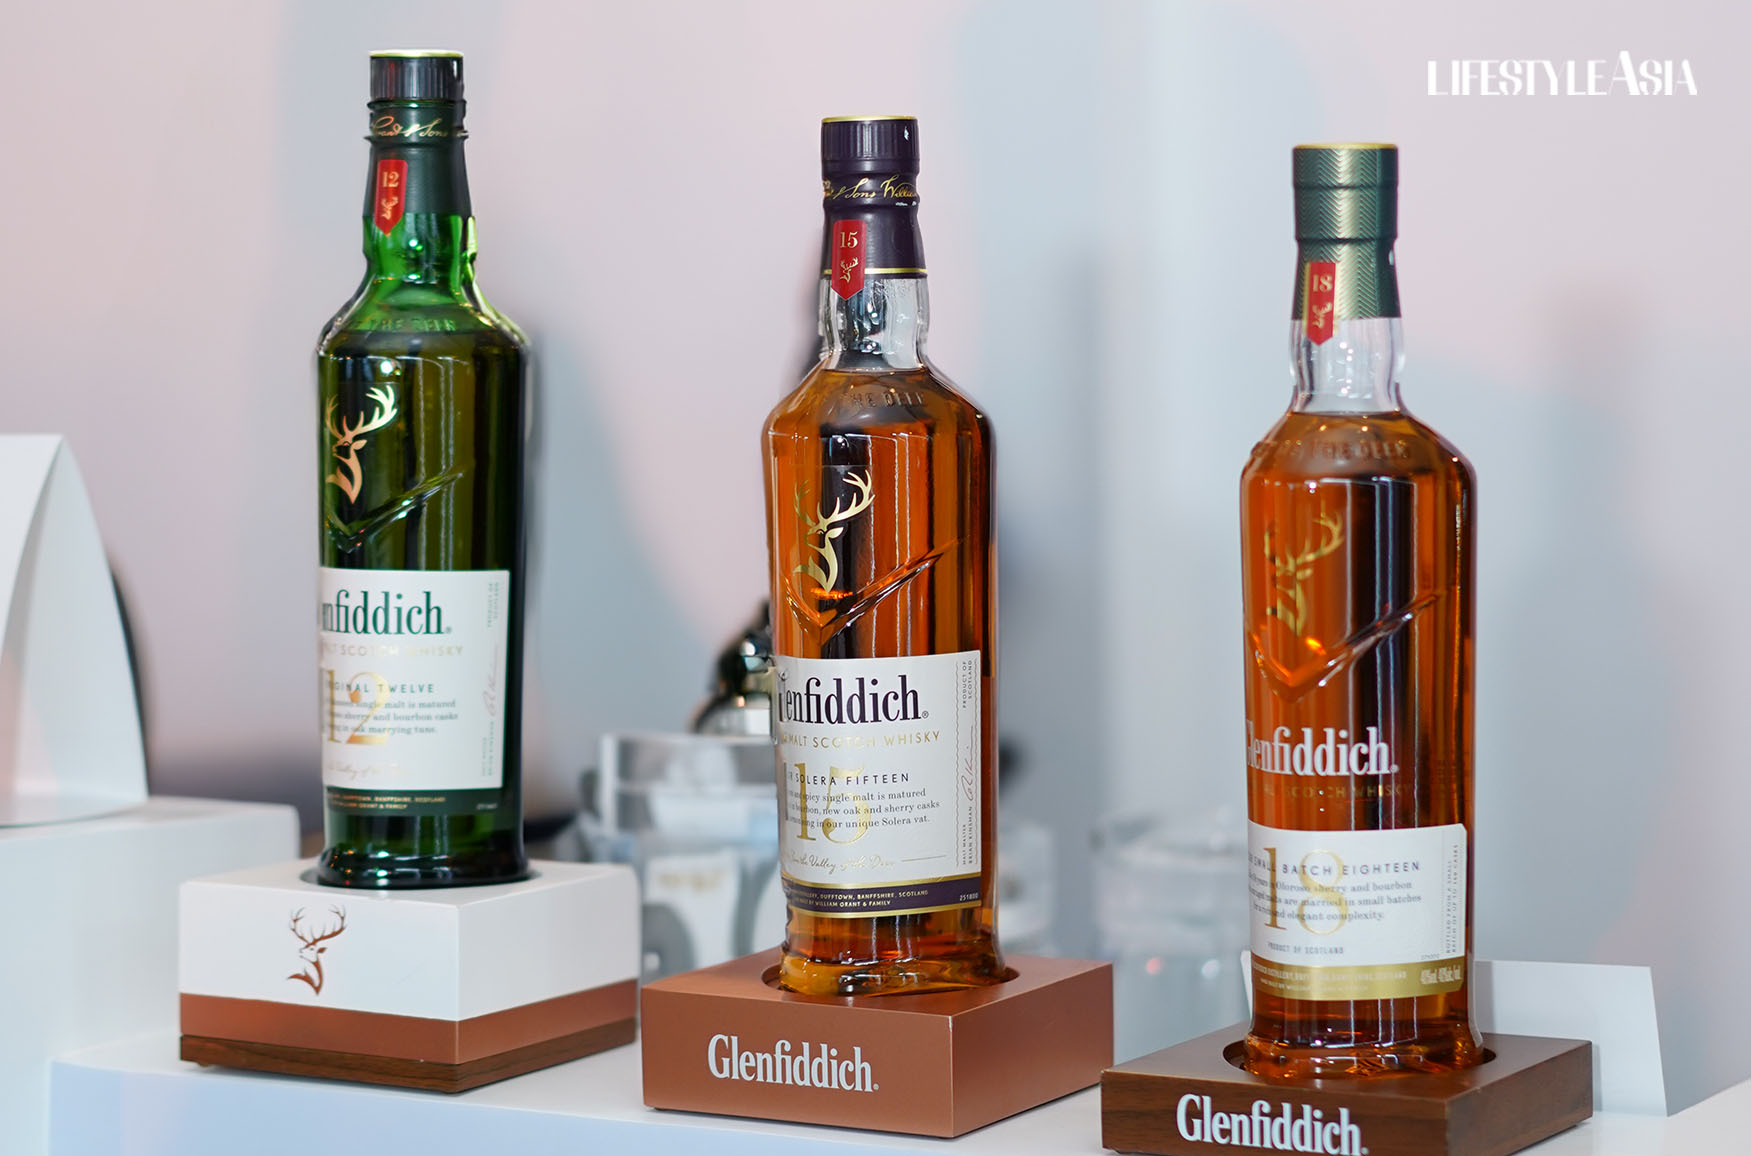 The Glenfiddich 12, 15, and 18 displayed on wooden bottle stands with Glenfiddich's glyph and trade name